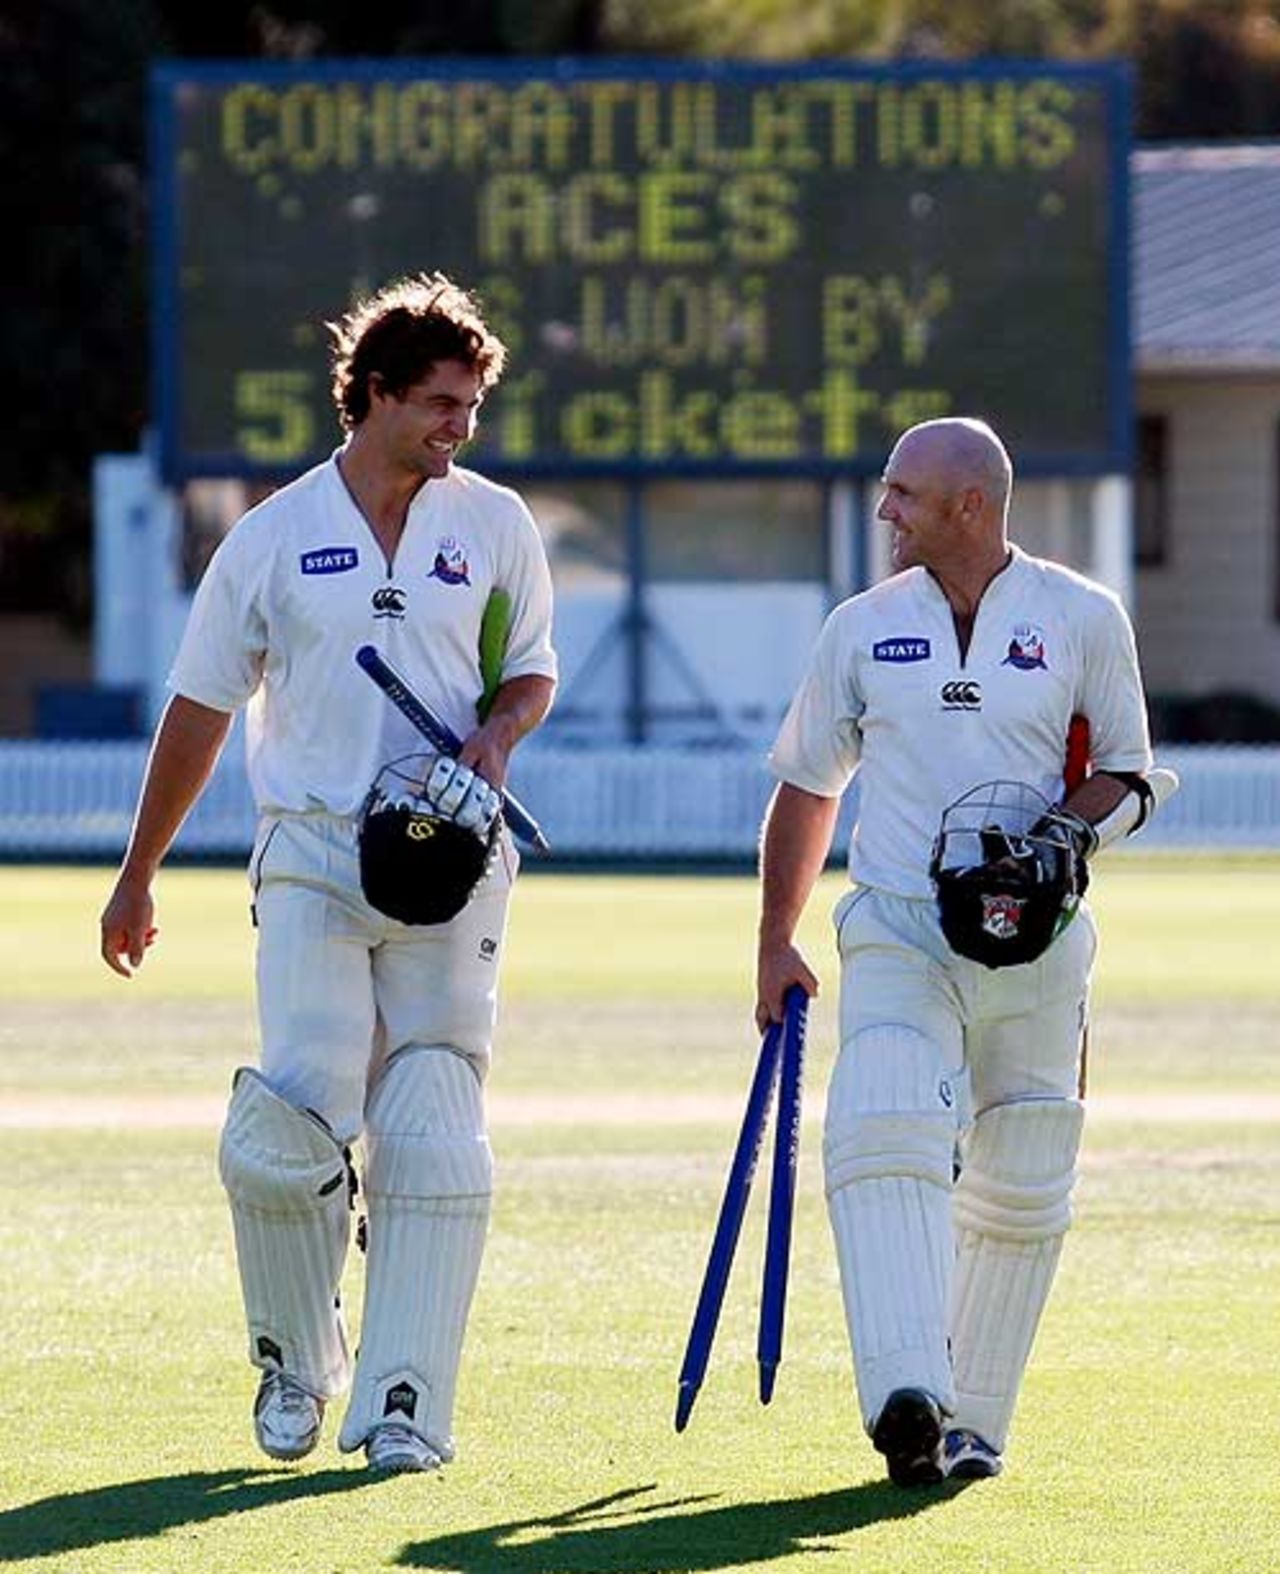 Colin de Grandhomme and Gareth Hopkins got Auckland home with an unbeaten 84-run stand, Auckland v Central Districts, State Championship final, Bert Sutcliffe Oval, April 10, 2009